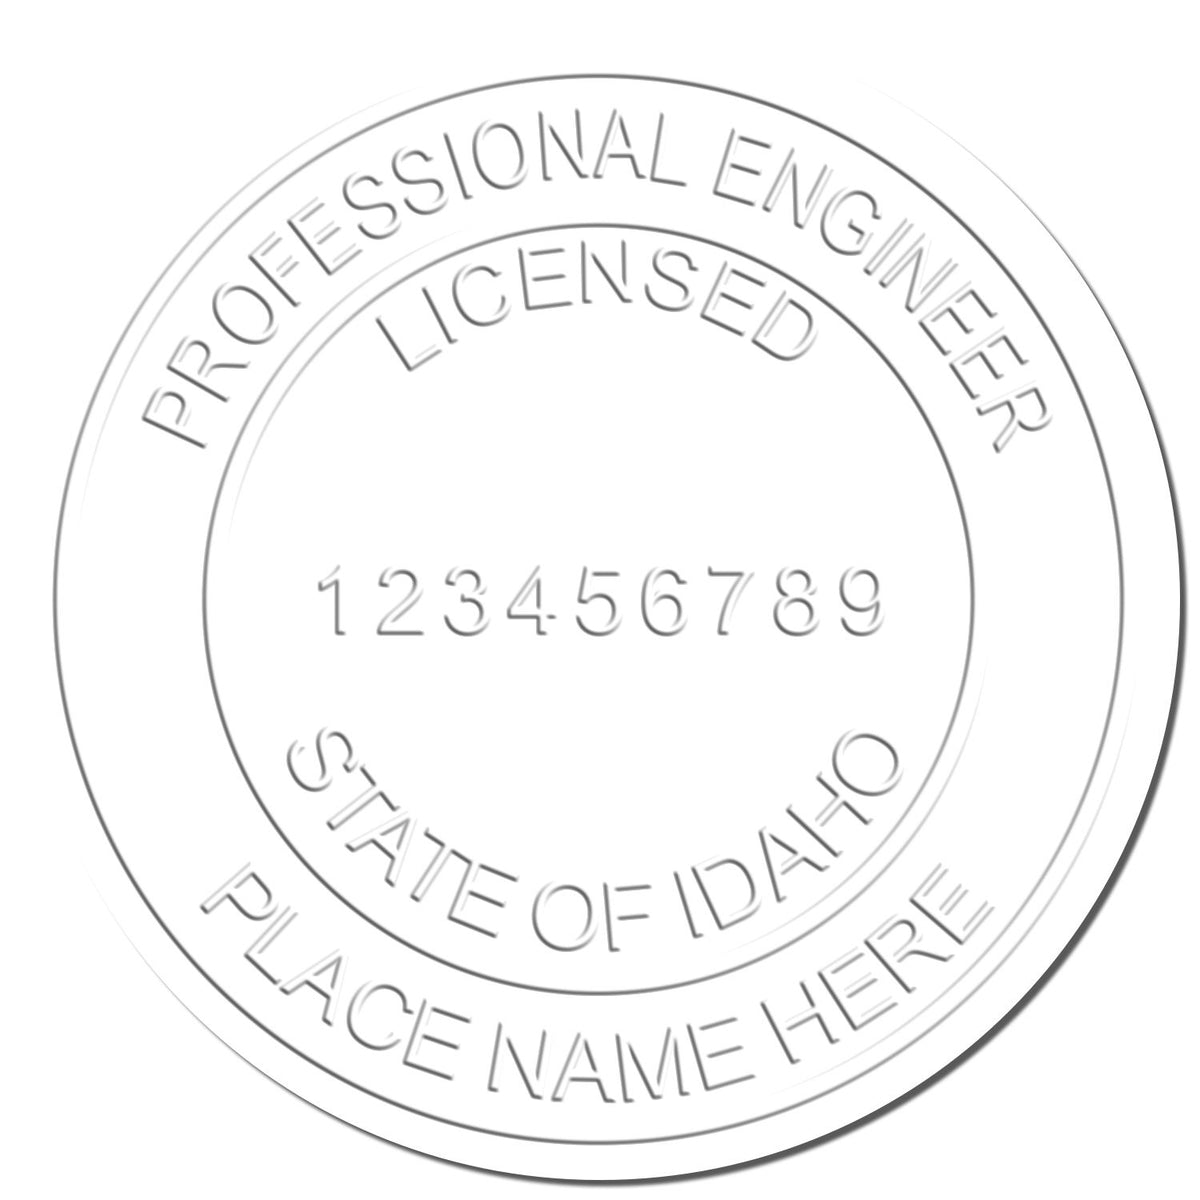 This paper is stamped with a sample imprint of the Gift Idaho Engineer Seal, signifying its quality and reliability.